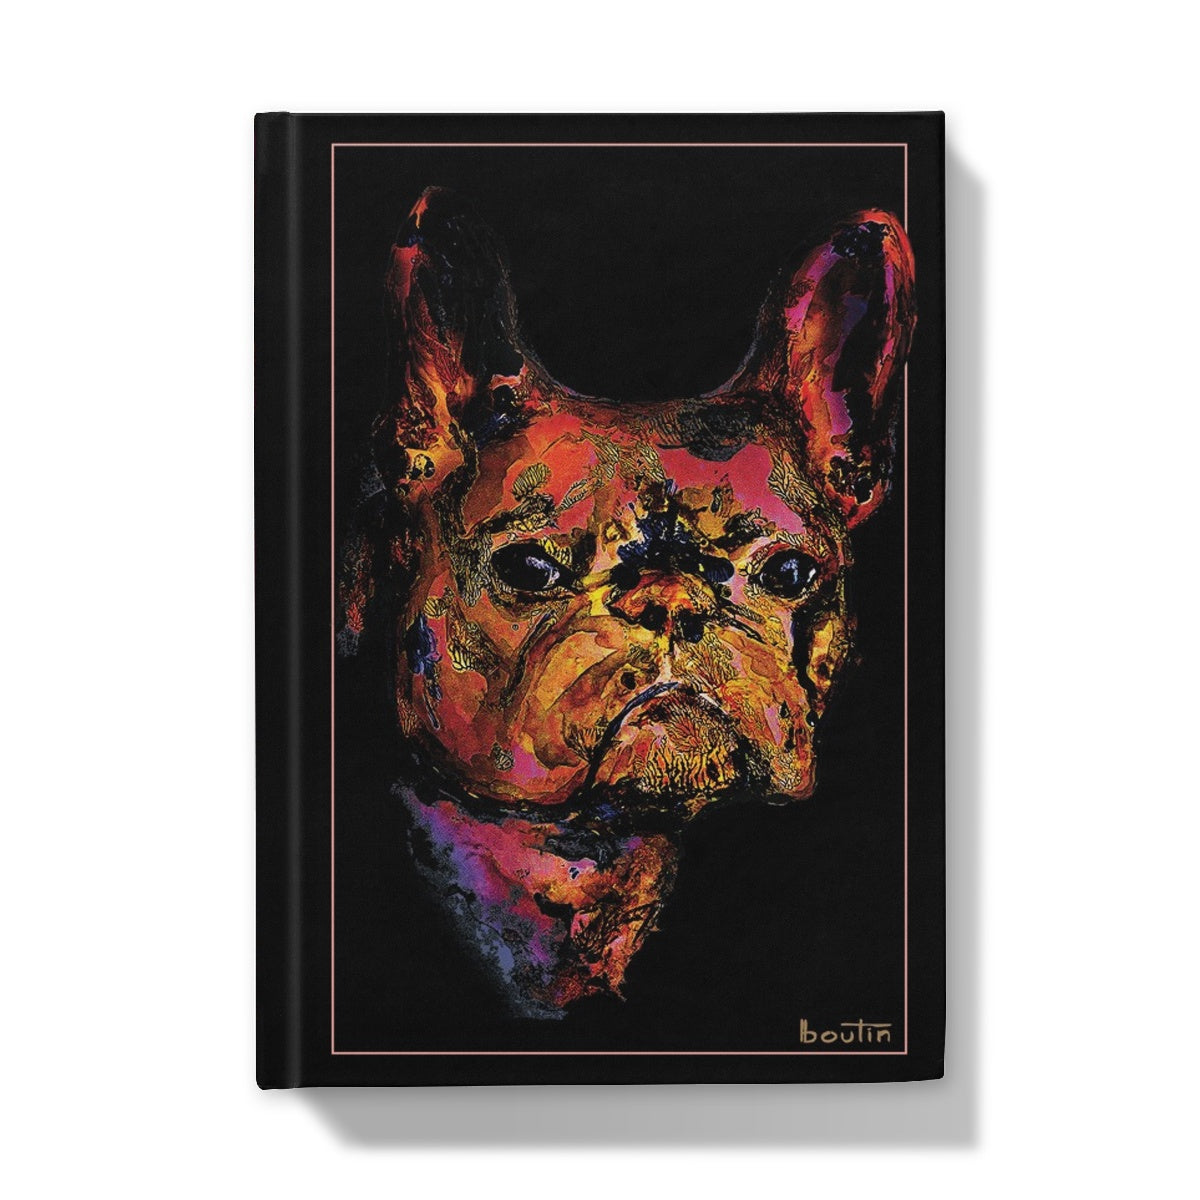 King George Magenta - Notebook by the artist Boutin